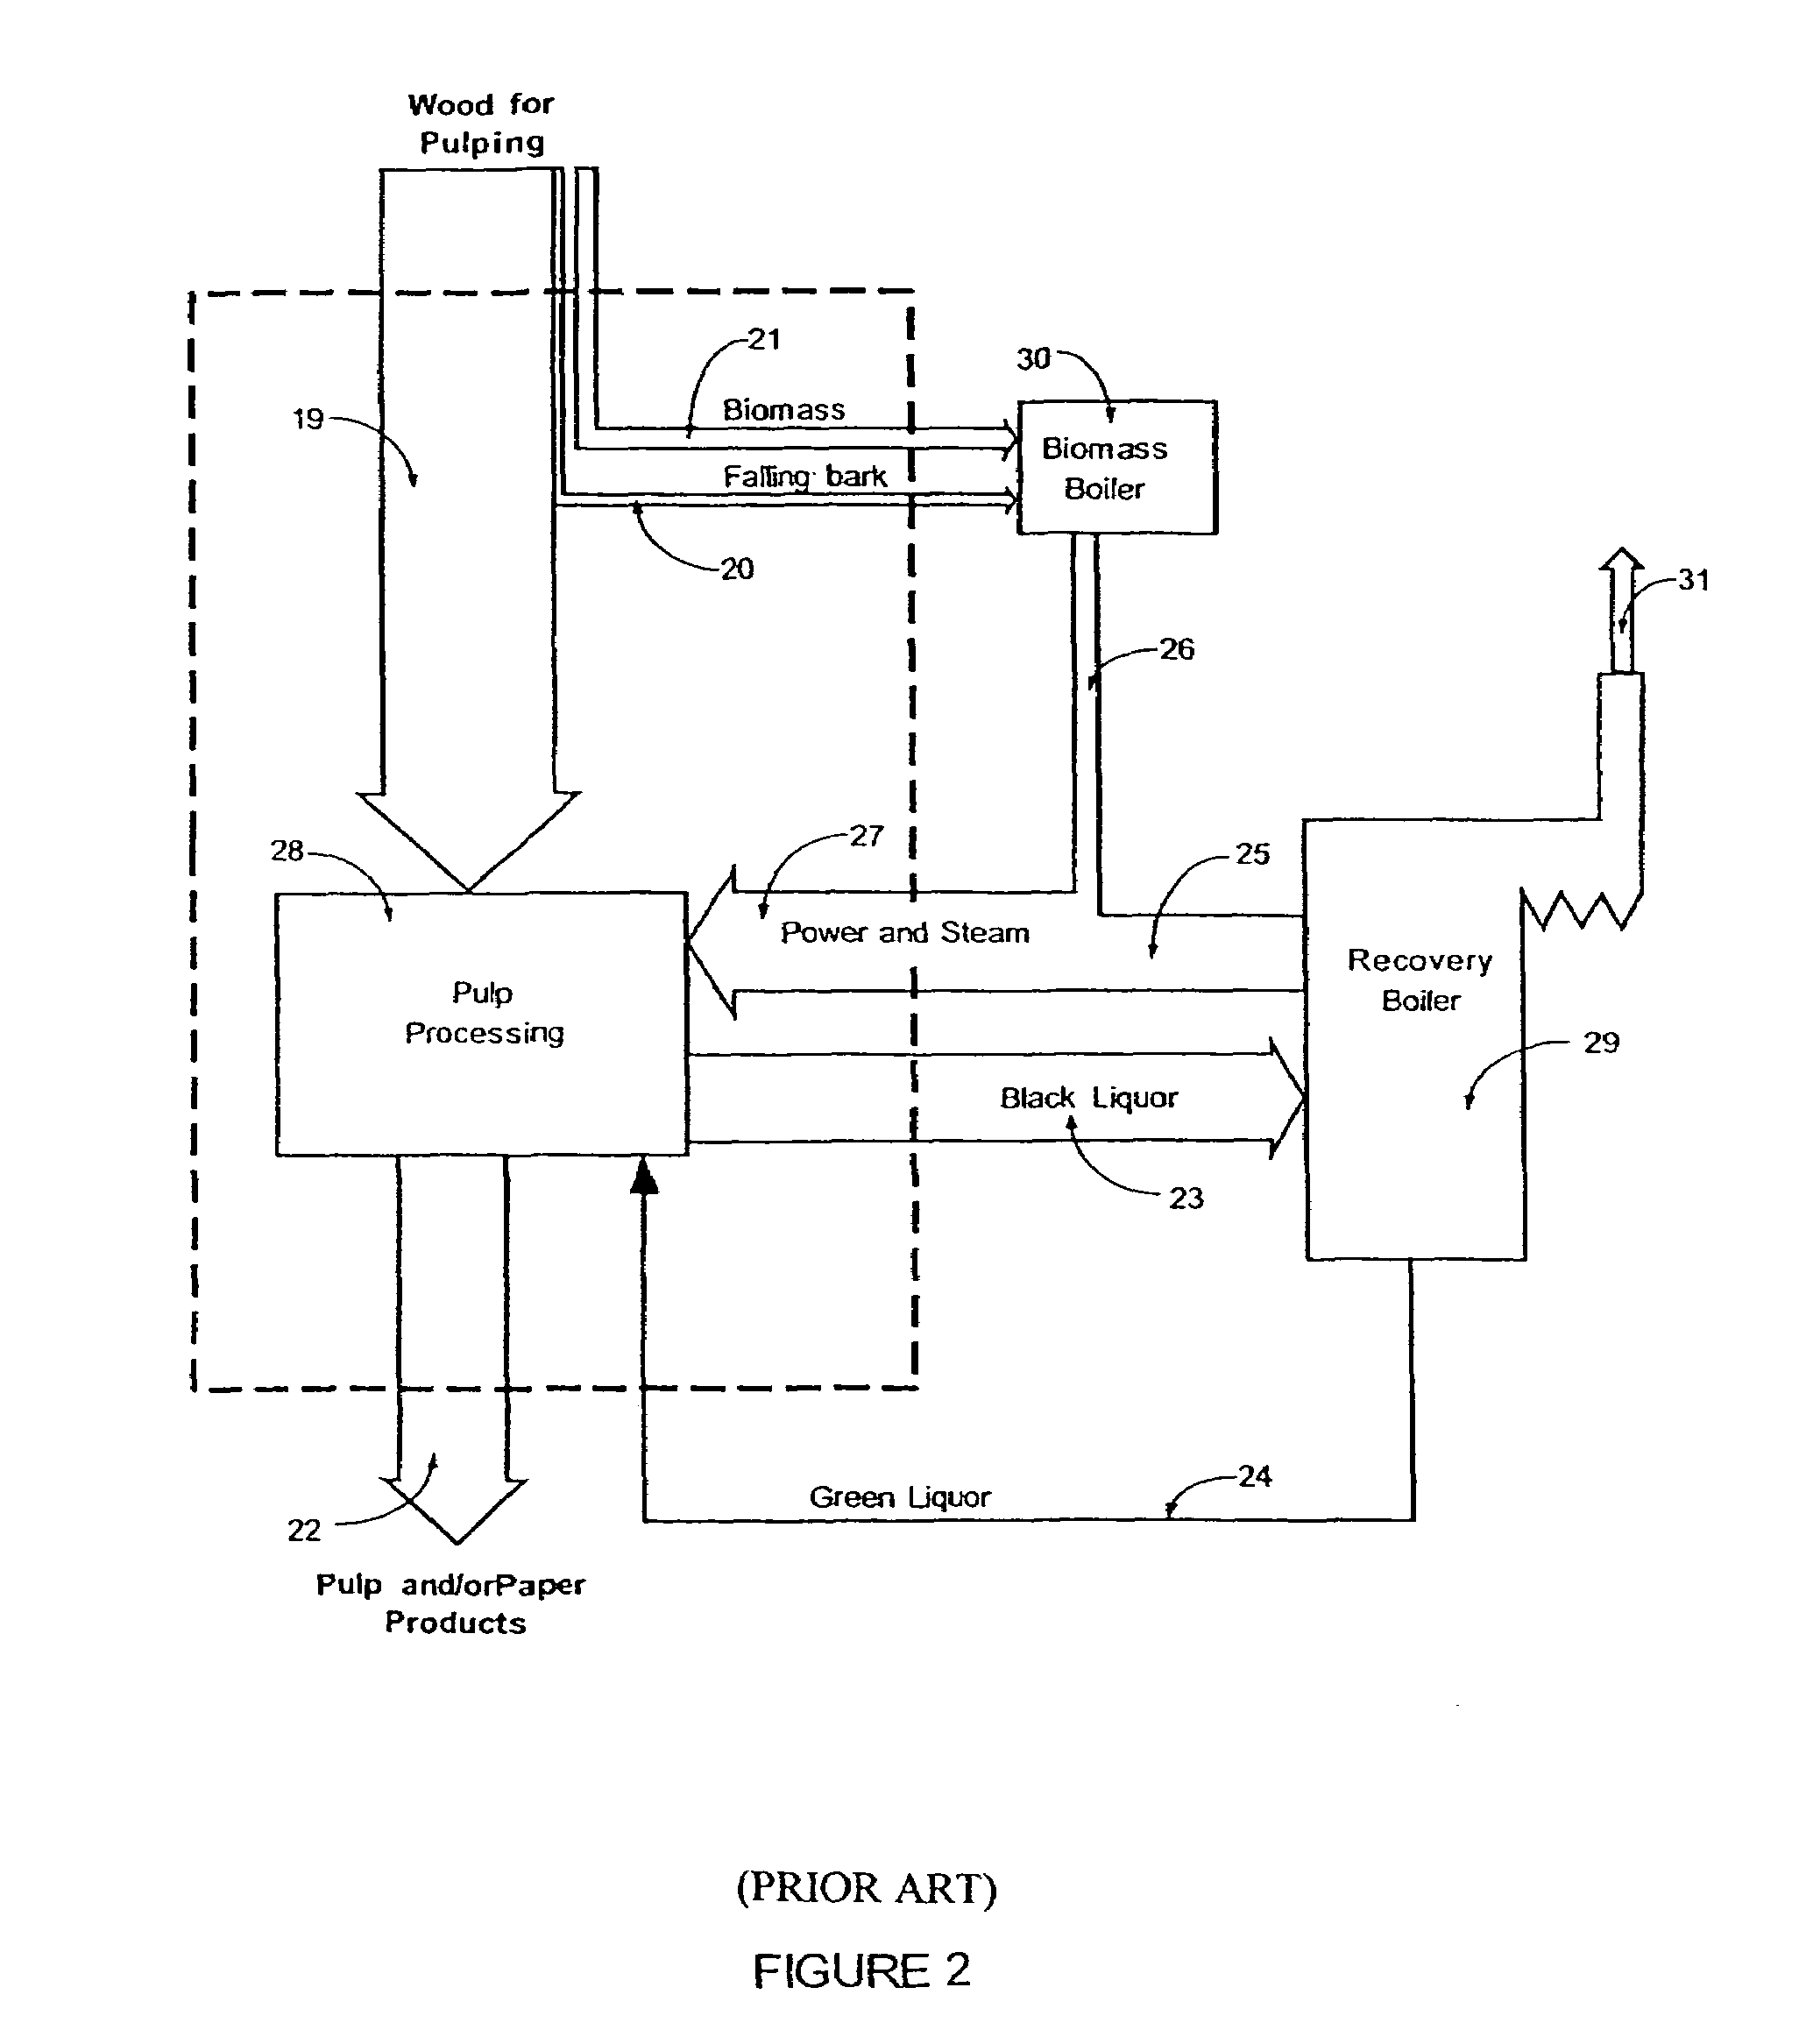 Process for production of synthesis gas in combination with the maintenance of the energy balance for a pulp mill